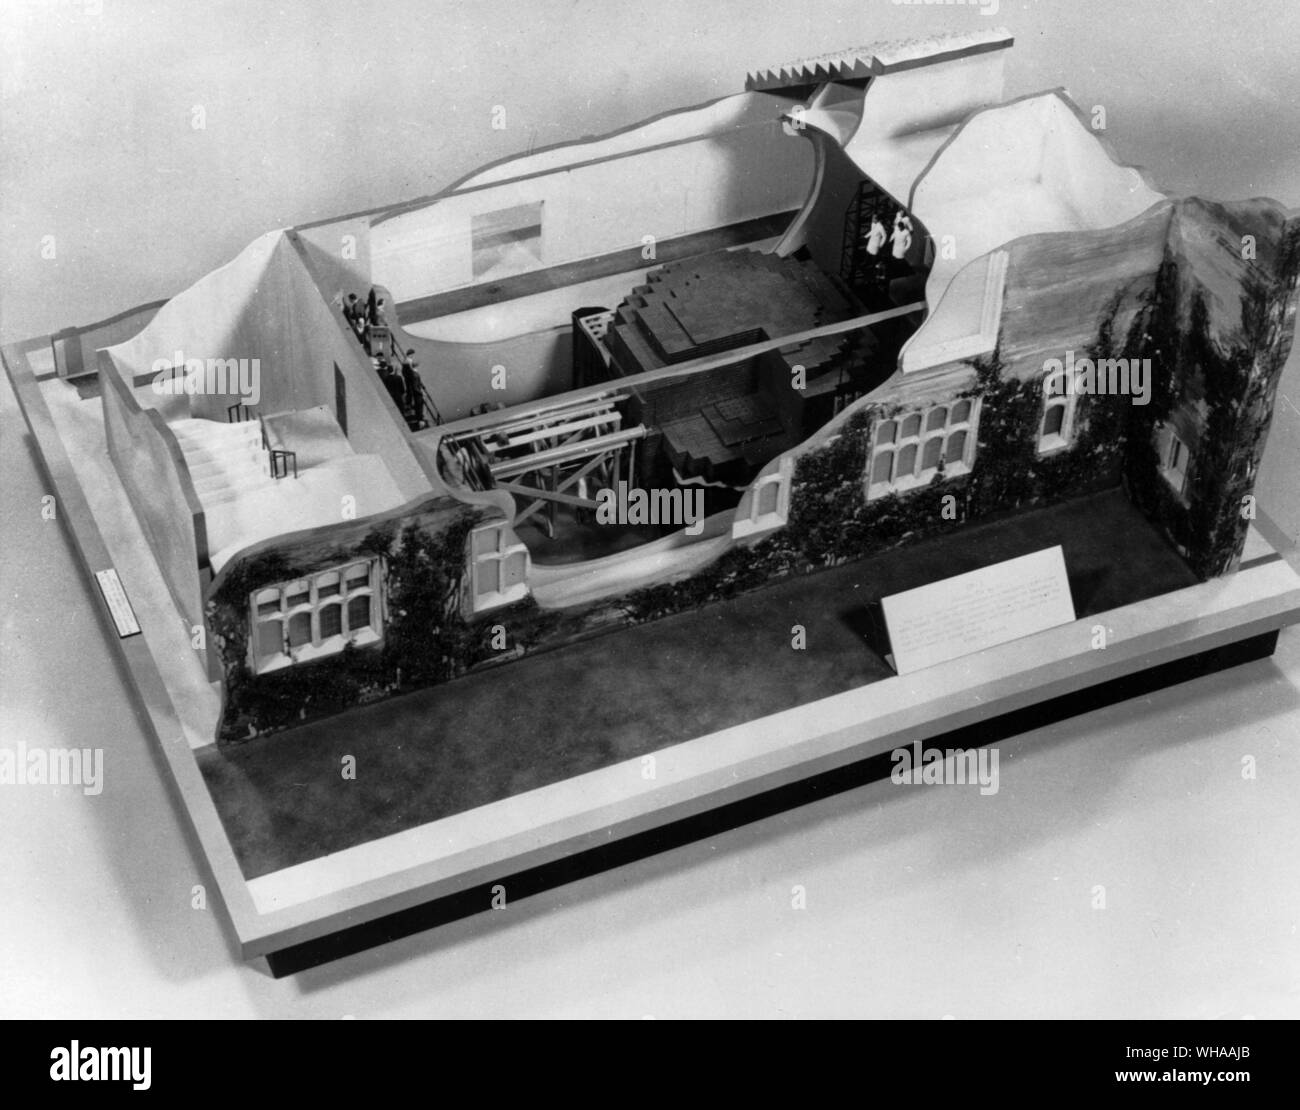 Argonne Illinois. Scale model of CP-1. The display shows the first pile, the racquets court in which the pile was located and significant details of the West Stands of Stagg Field at the University of Chicago. It depicts the historic scene on December 2nd 1942 when Dr Enrico Fermi and associates achieved the first self sustaining chain reaction and thereby initiated the controlled release of nuclear energy Stock Photo